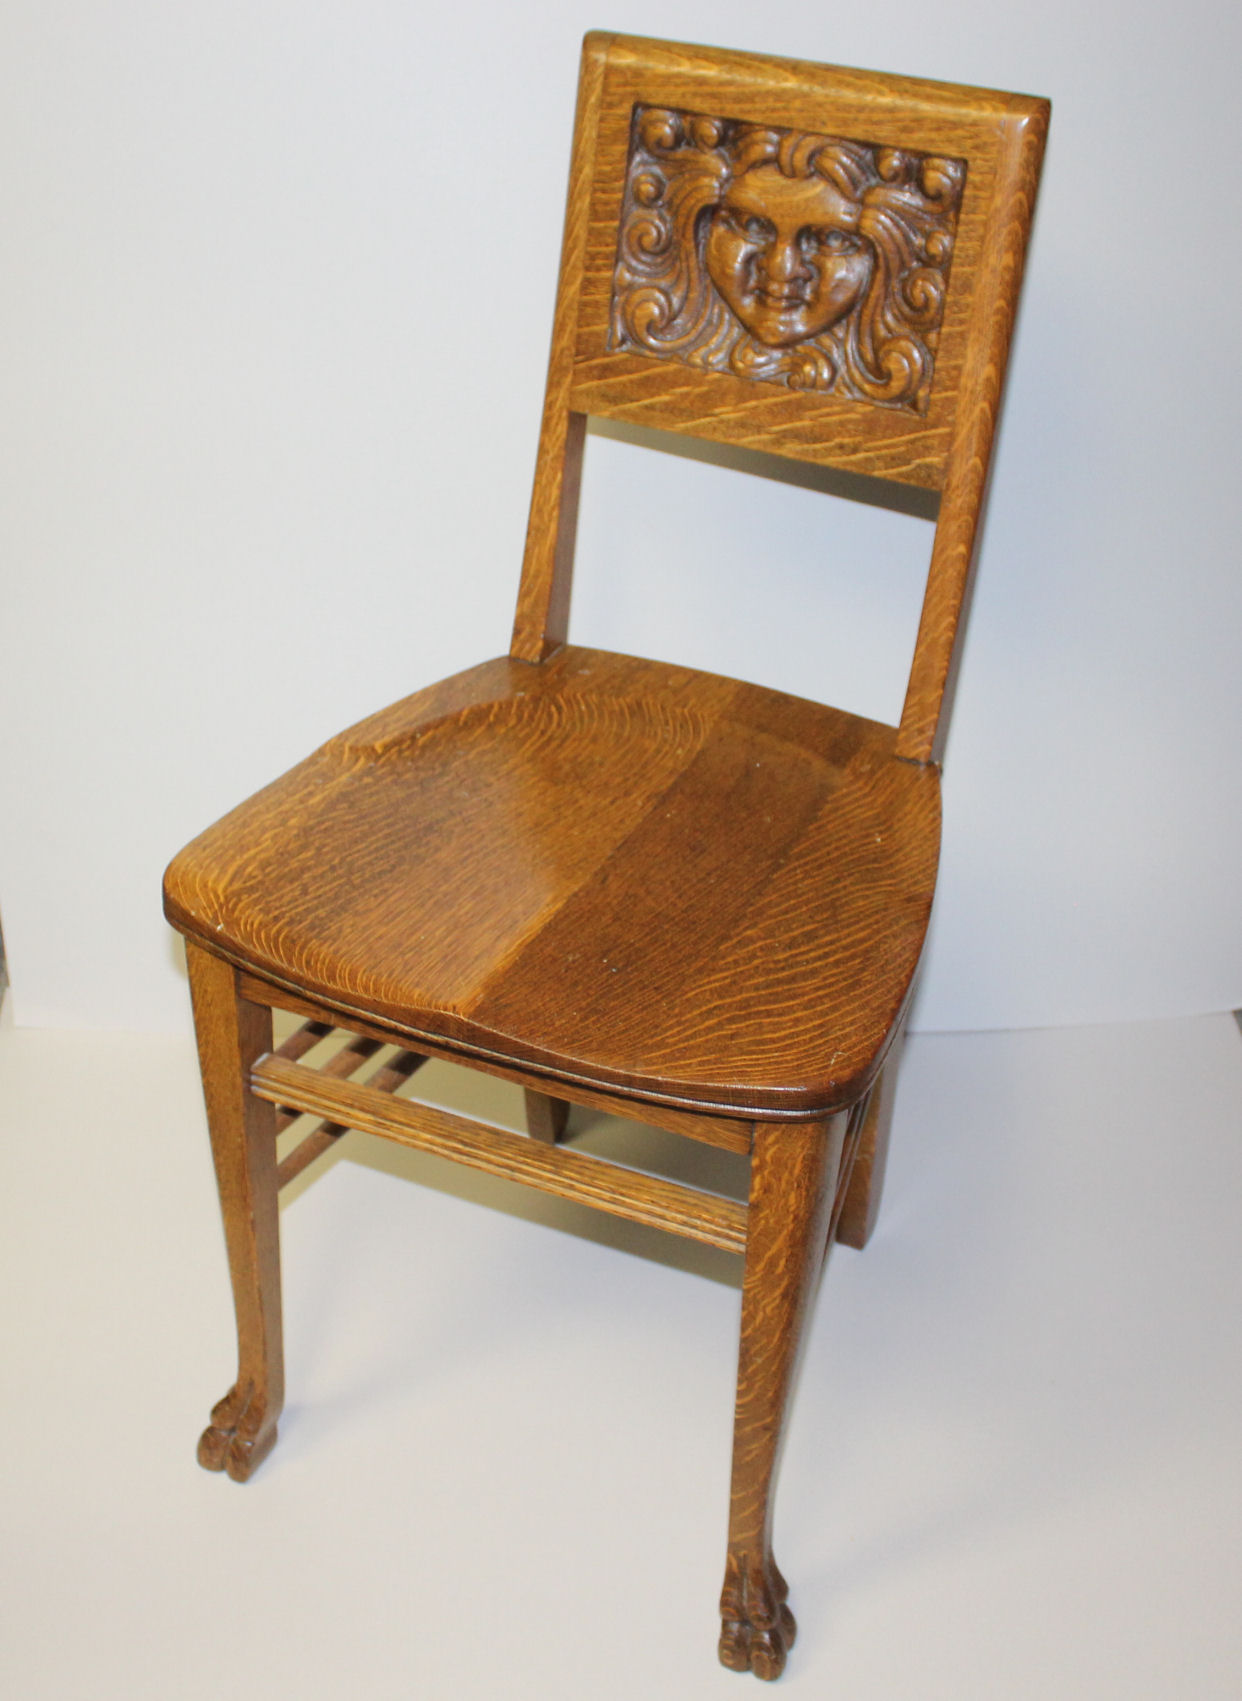 Bargain John S Antiques Antique Oak Vanity Or Small Office Chair